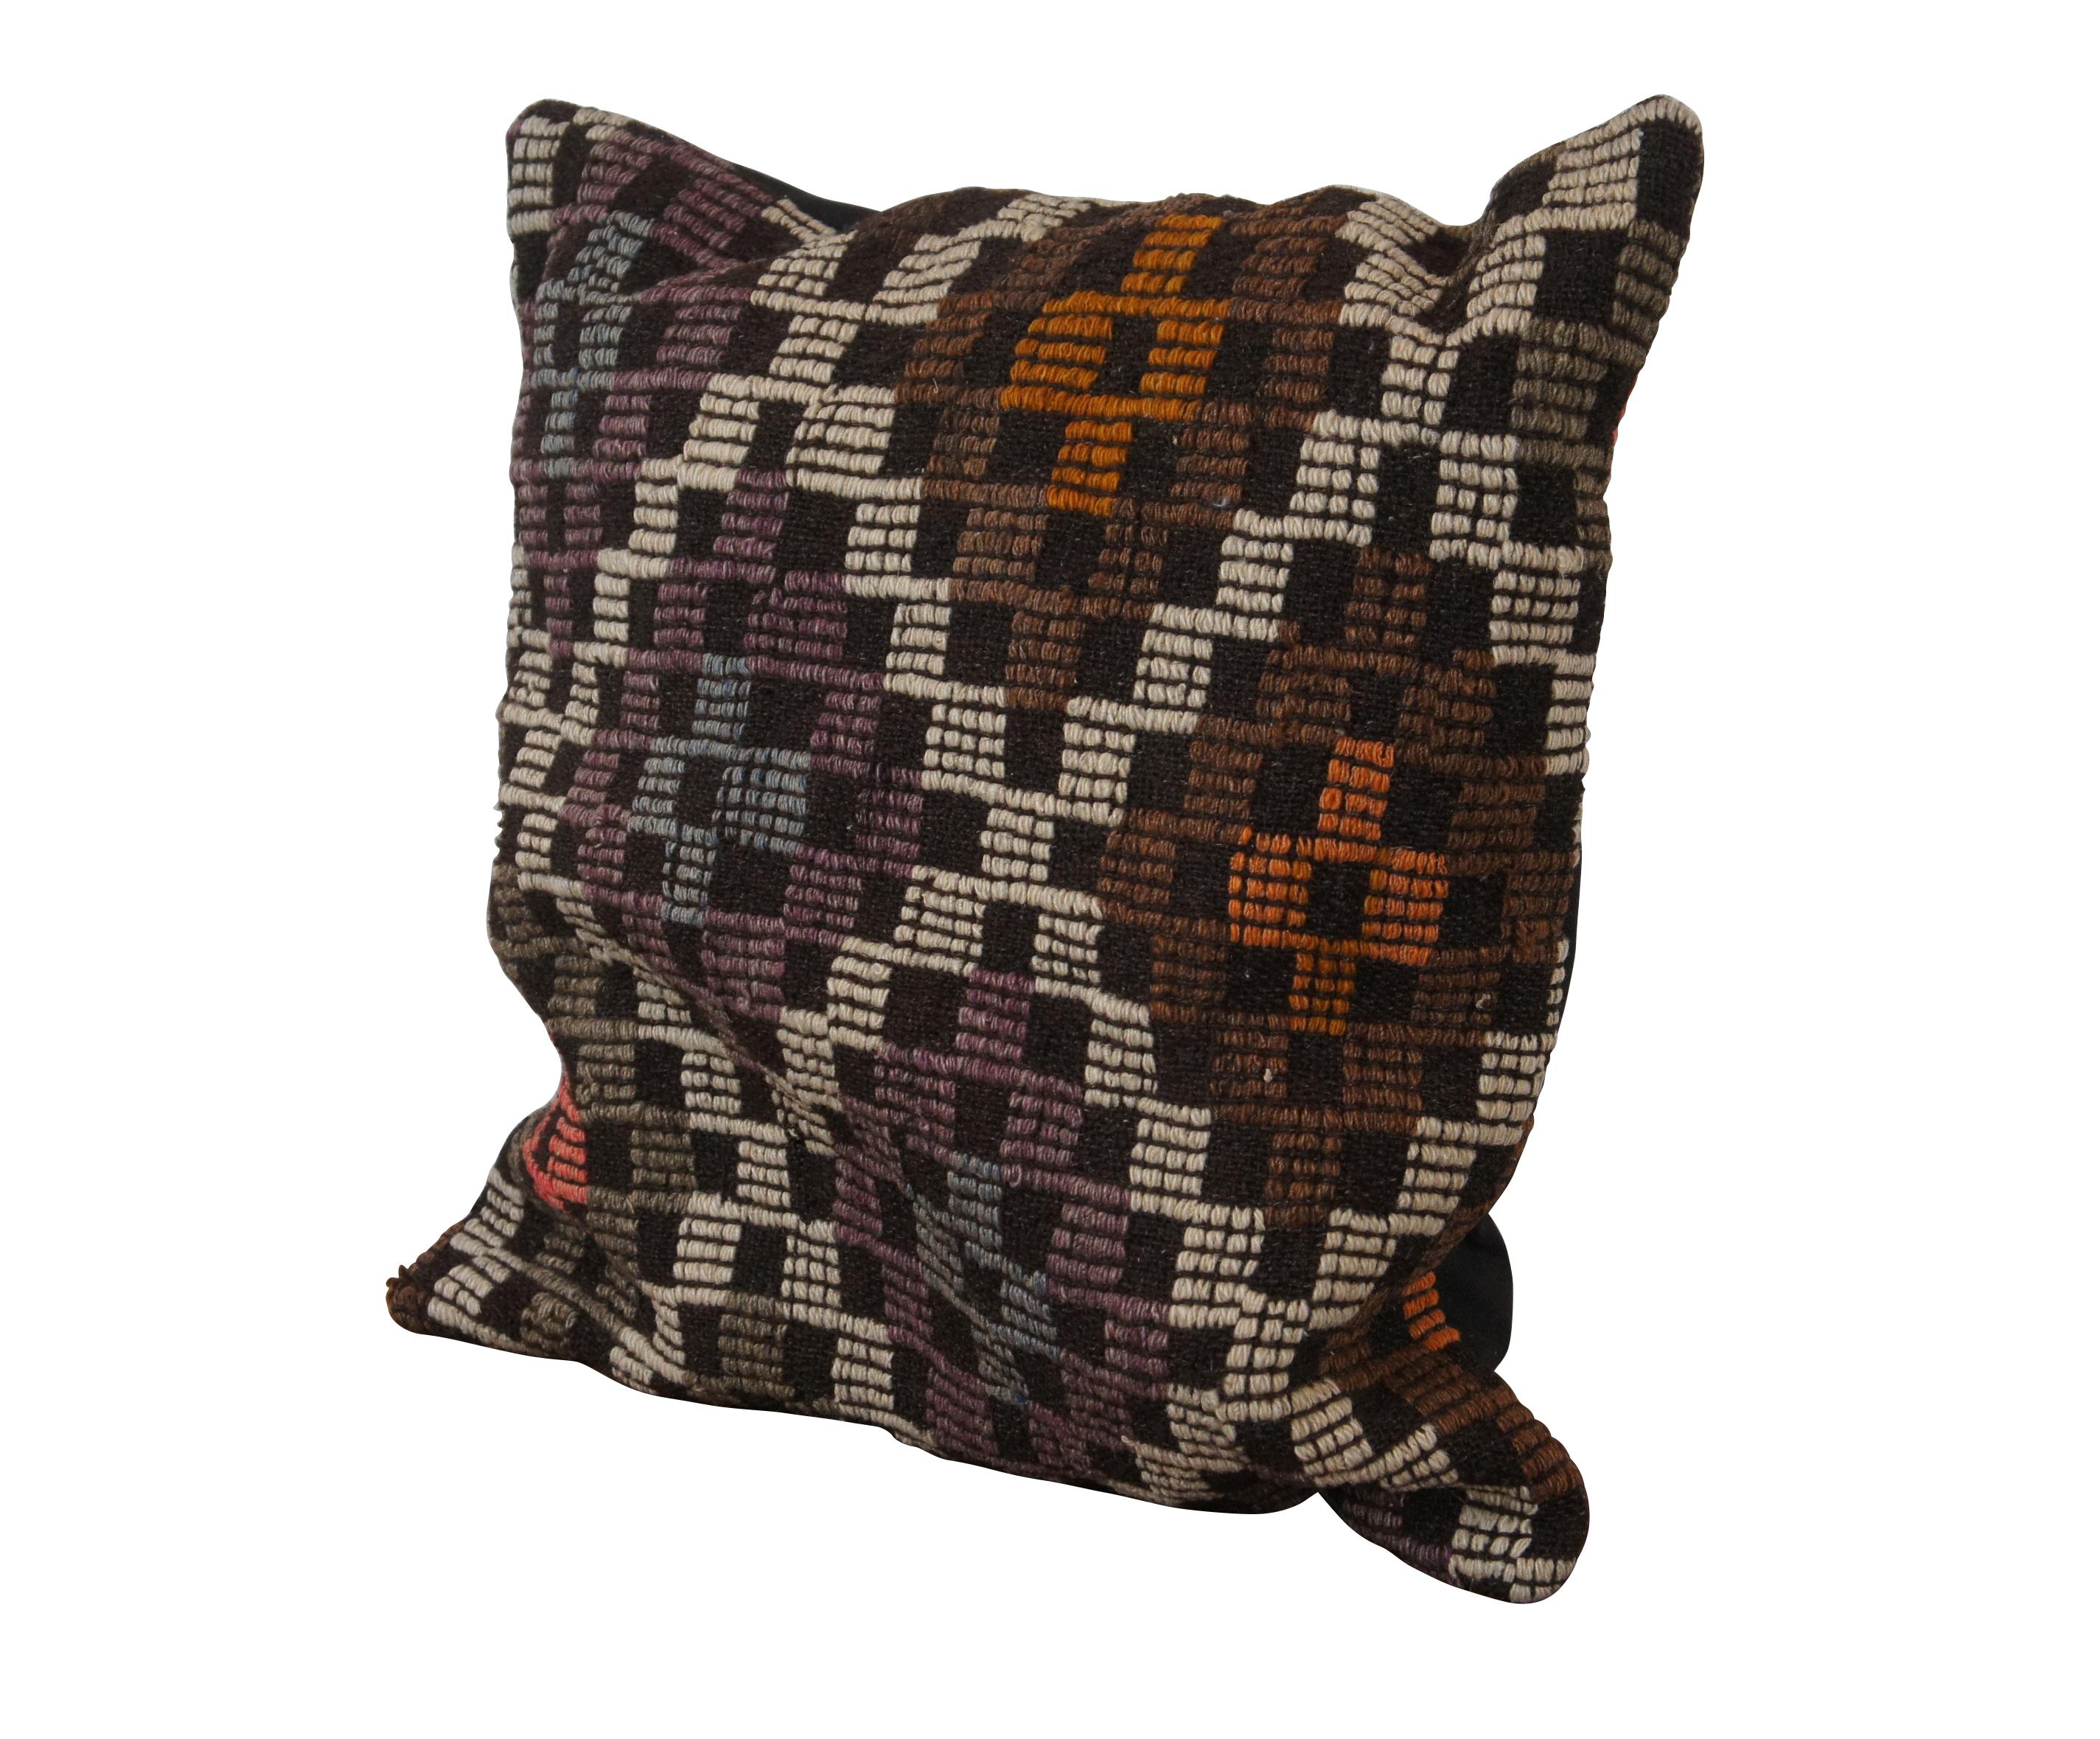 20th century square throw pillow, hand woven wool Oldkilim geometric diamond design in brown, white, gray, purple, orange and blue. Black cotton back with zipper closure. Bamboo fiber filled. Made in Turkey.

Dimensions:
18